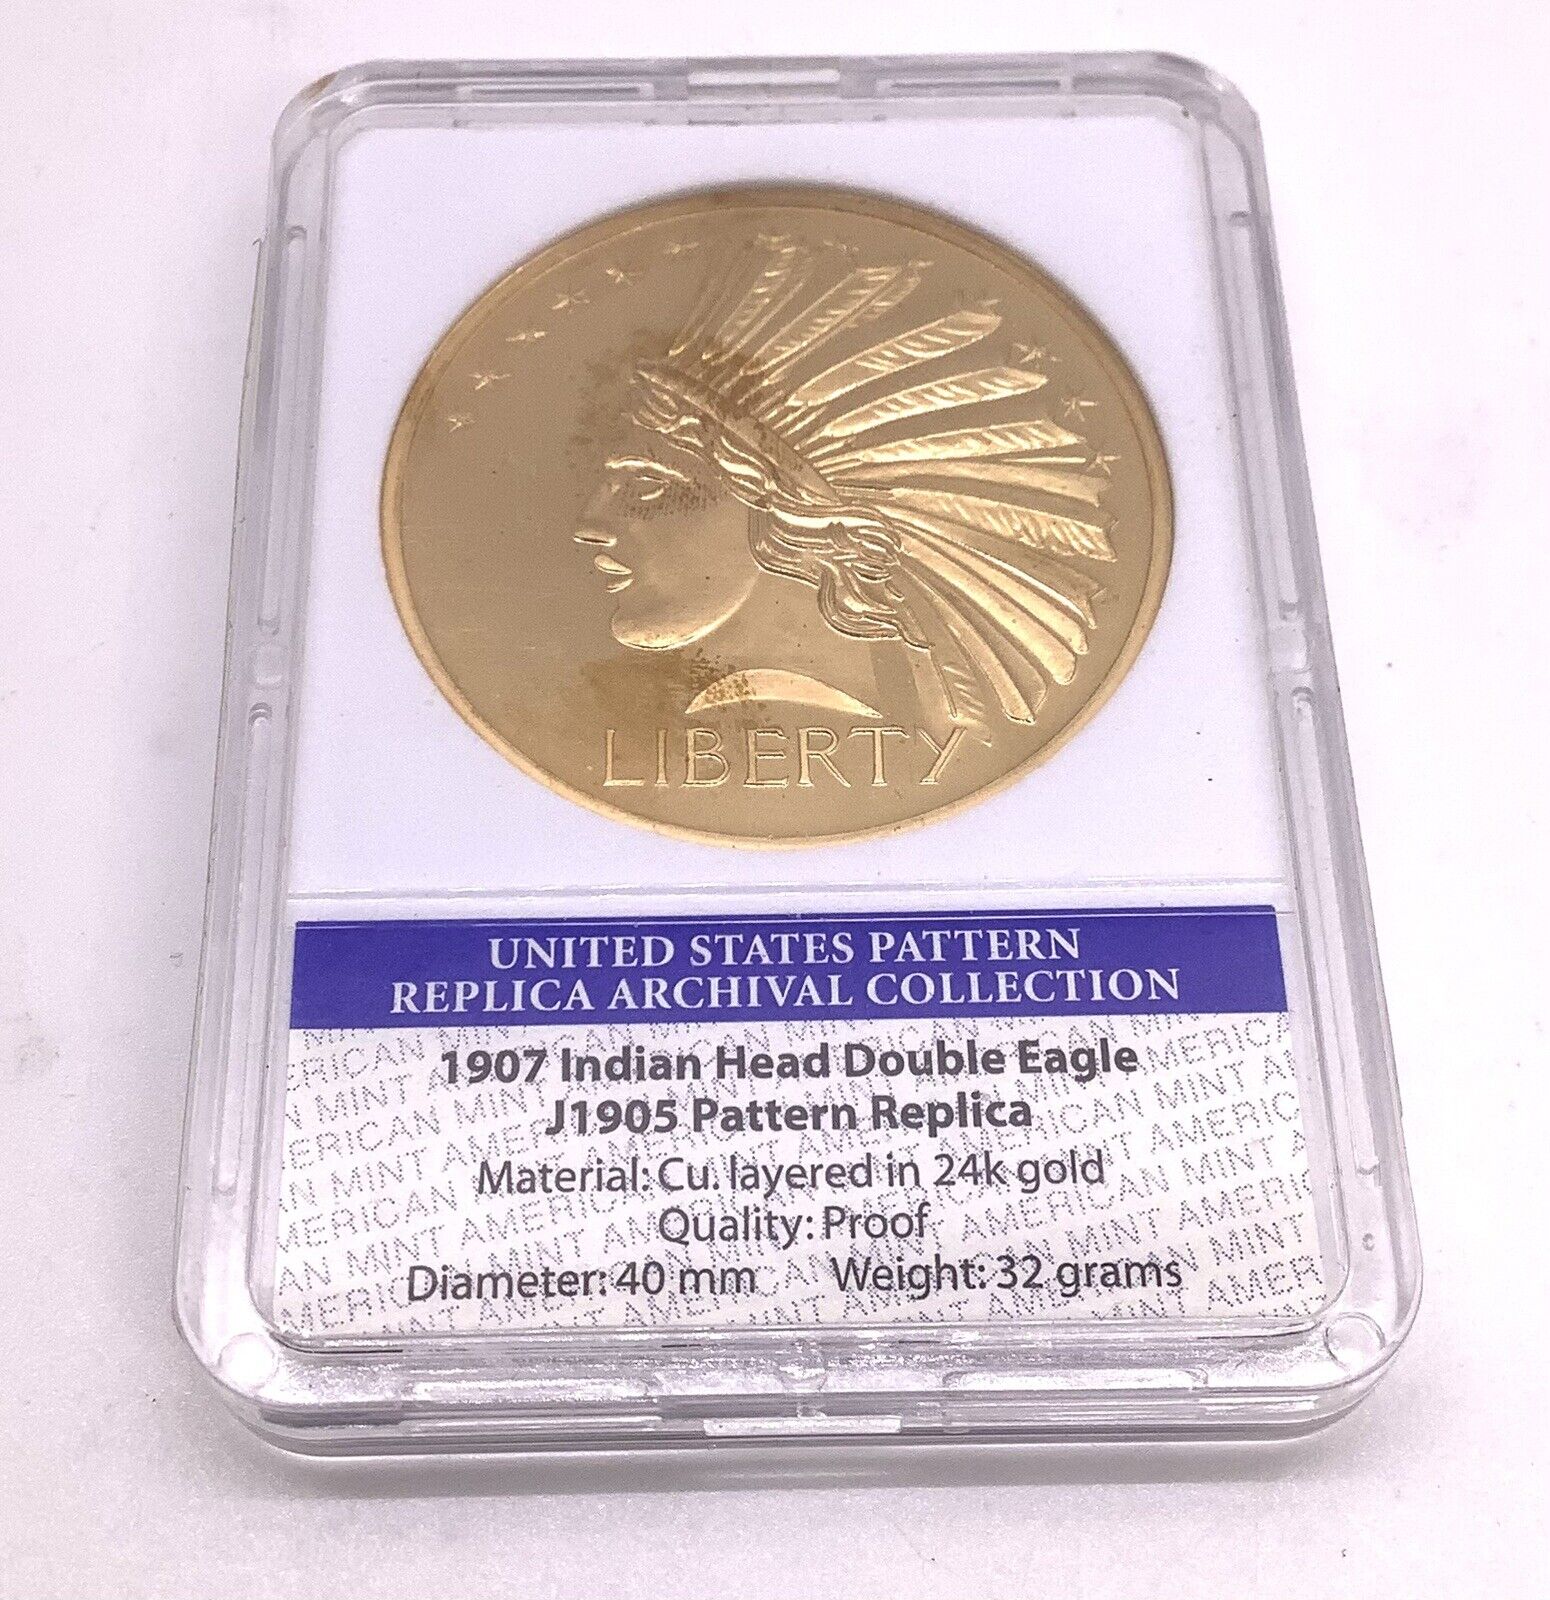 American Mint 1907 Indian Head Double Eagle Replica Proof Layered 24 K Gold 20$